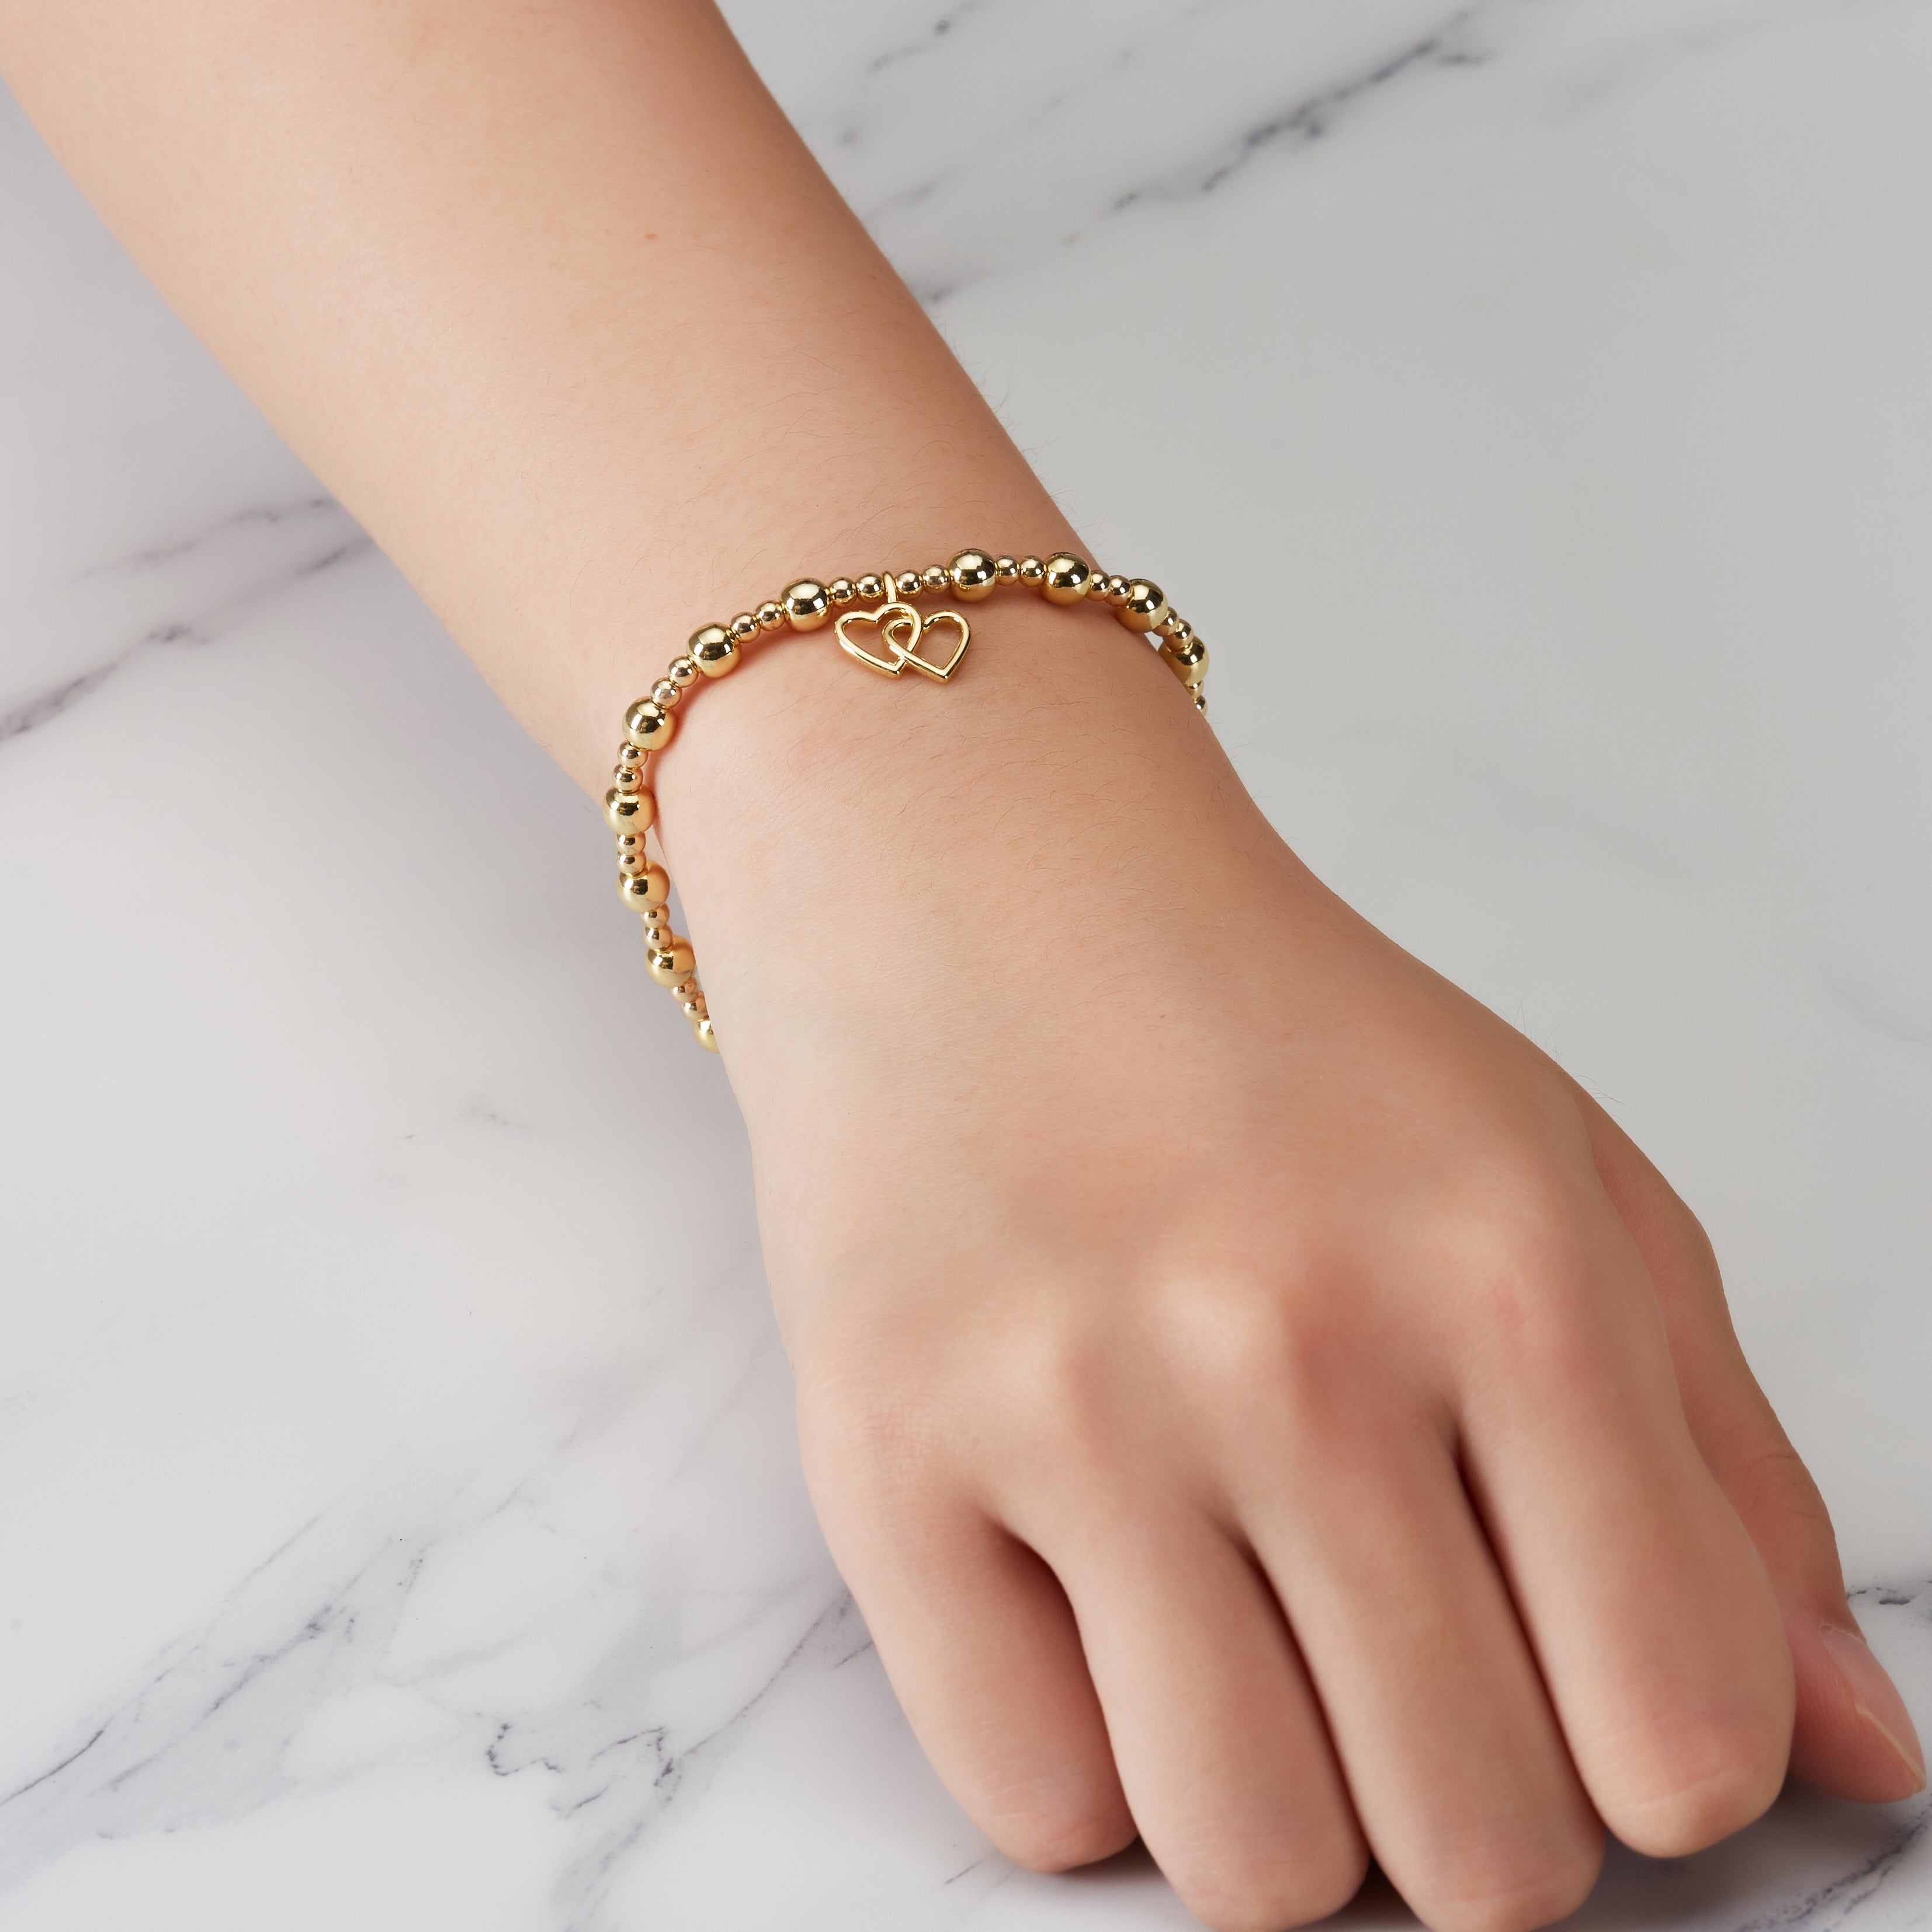 Gold Plated Sister Quote Stretch Bracelet with Gift Box